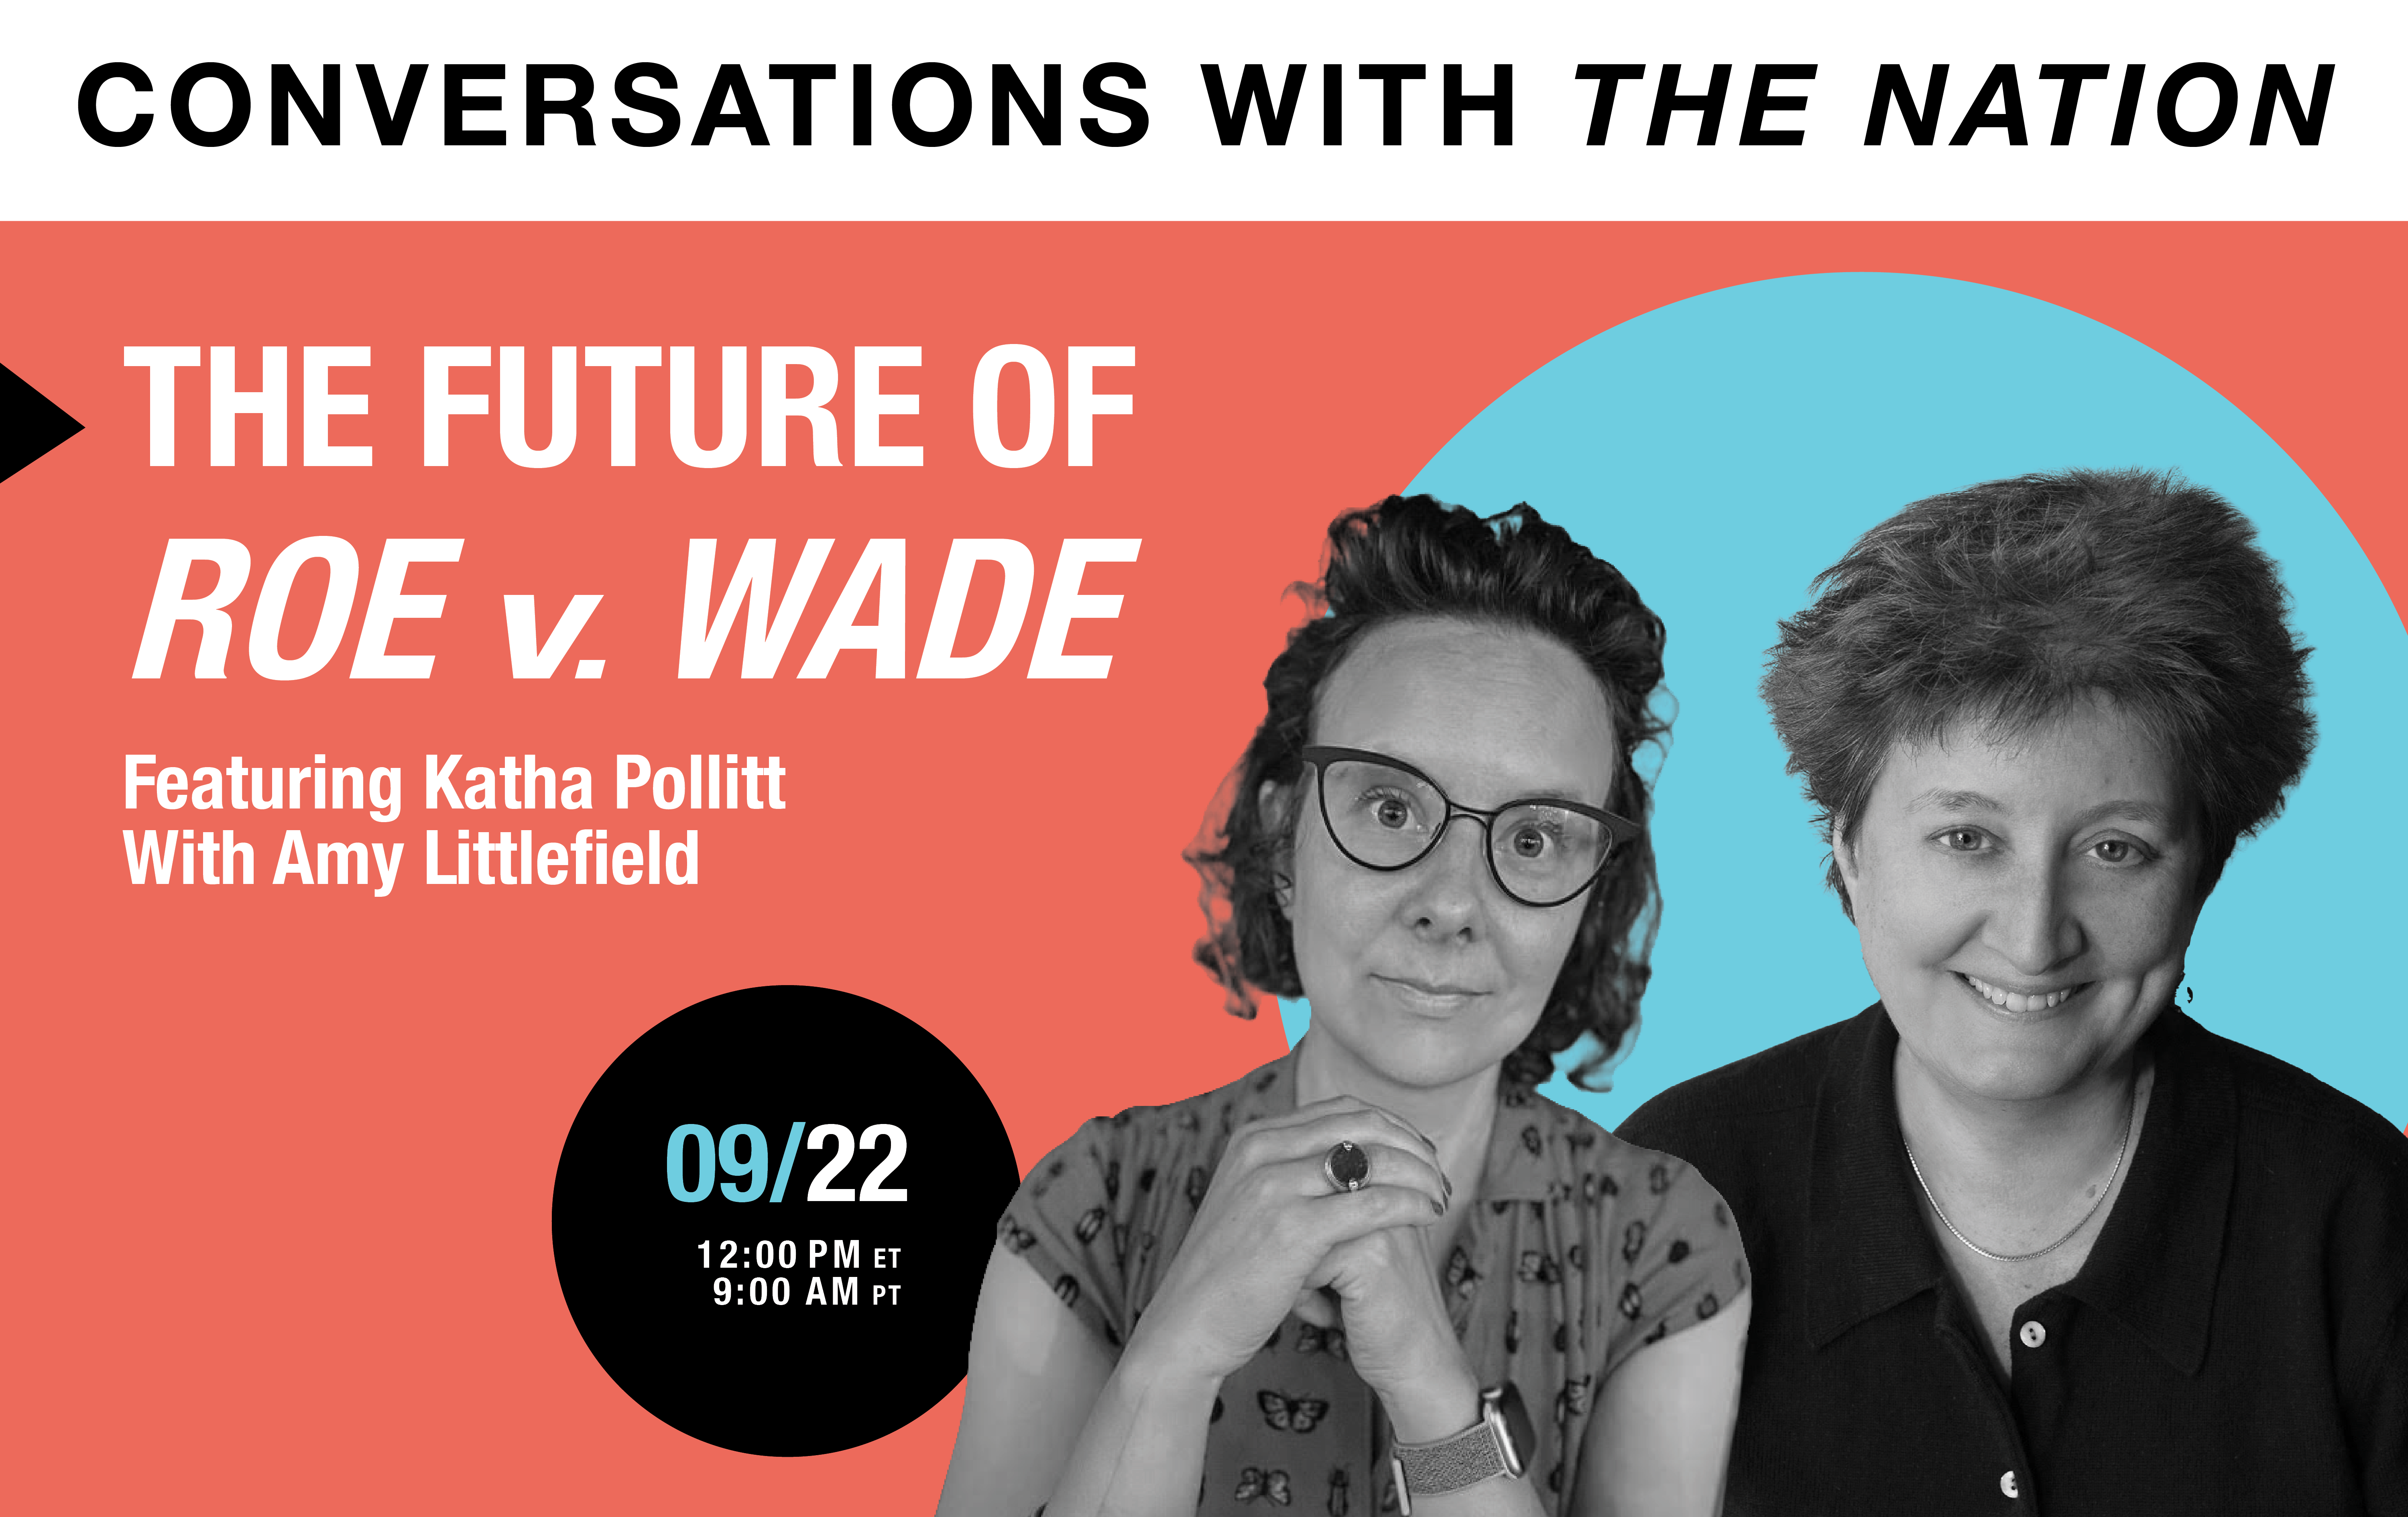 Image for Conversation with The Nation: The Future of Roe v. Wade